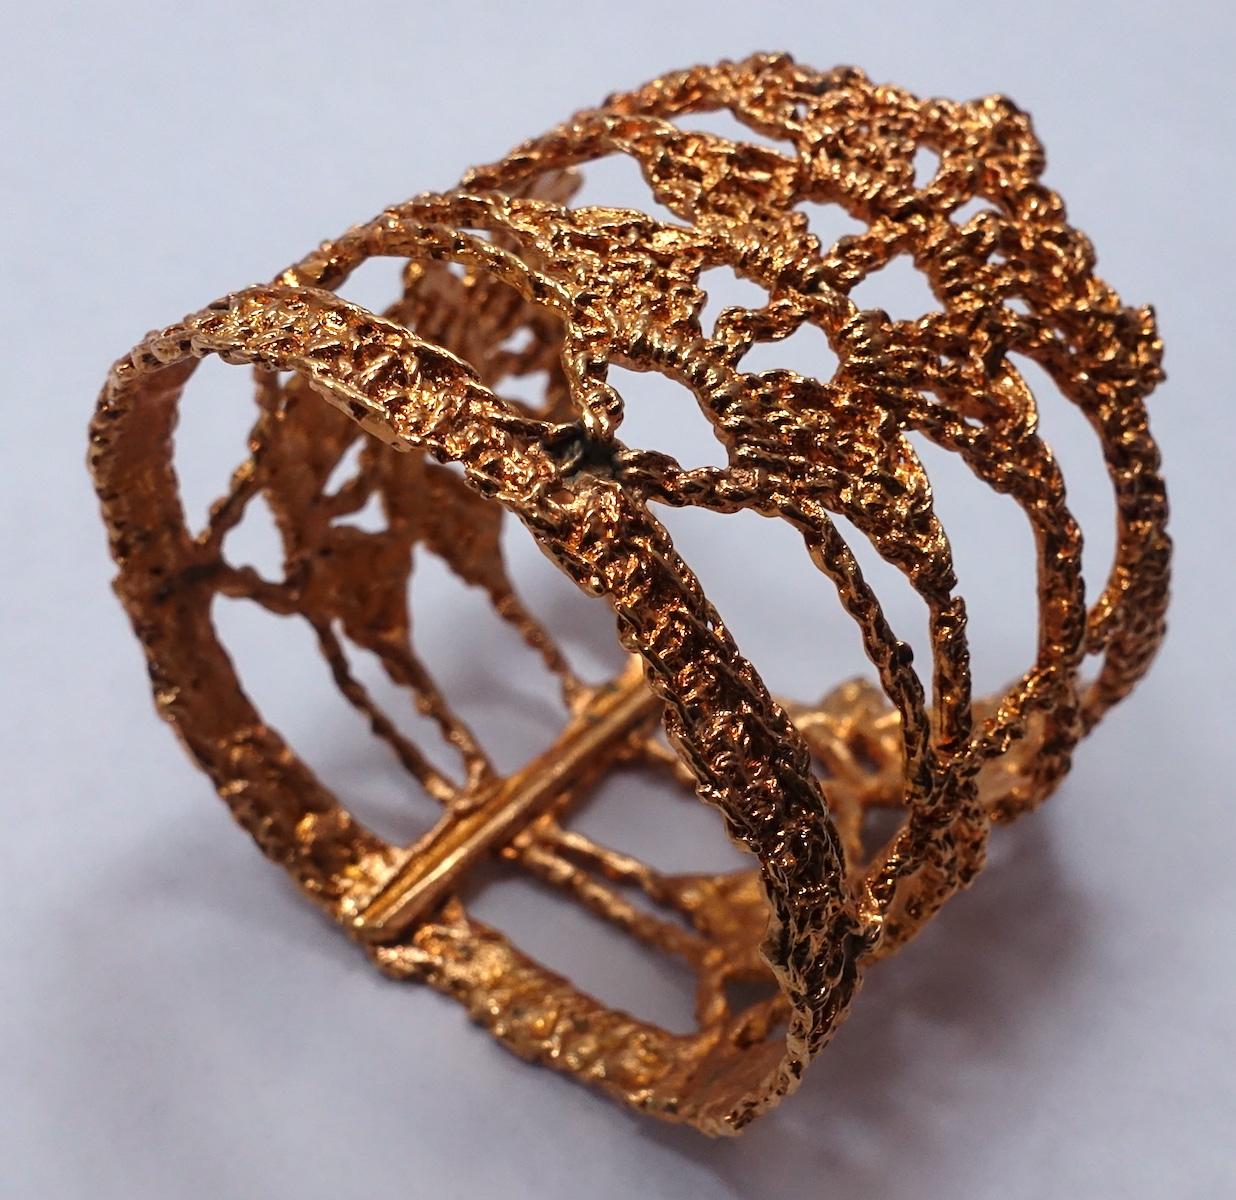 This vintage signed Christian Lacroix wide cuff bracelet has a heavily intricate openwork design in a gold tone setting.  This cuff measures 3” x 2-5/8” and will fit a size 7-1/2” wrist.  It is signed “Christian Lacroix Made in France” and is in